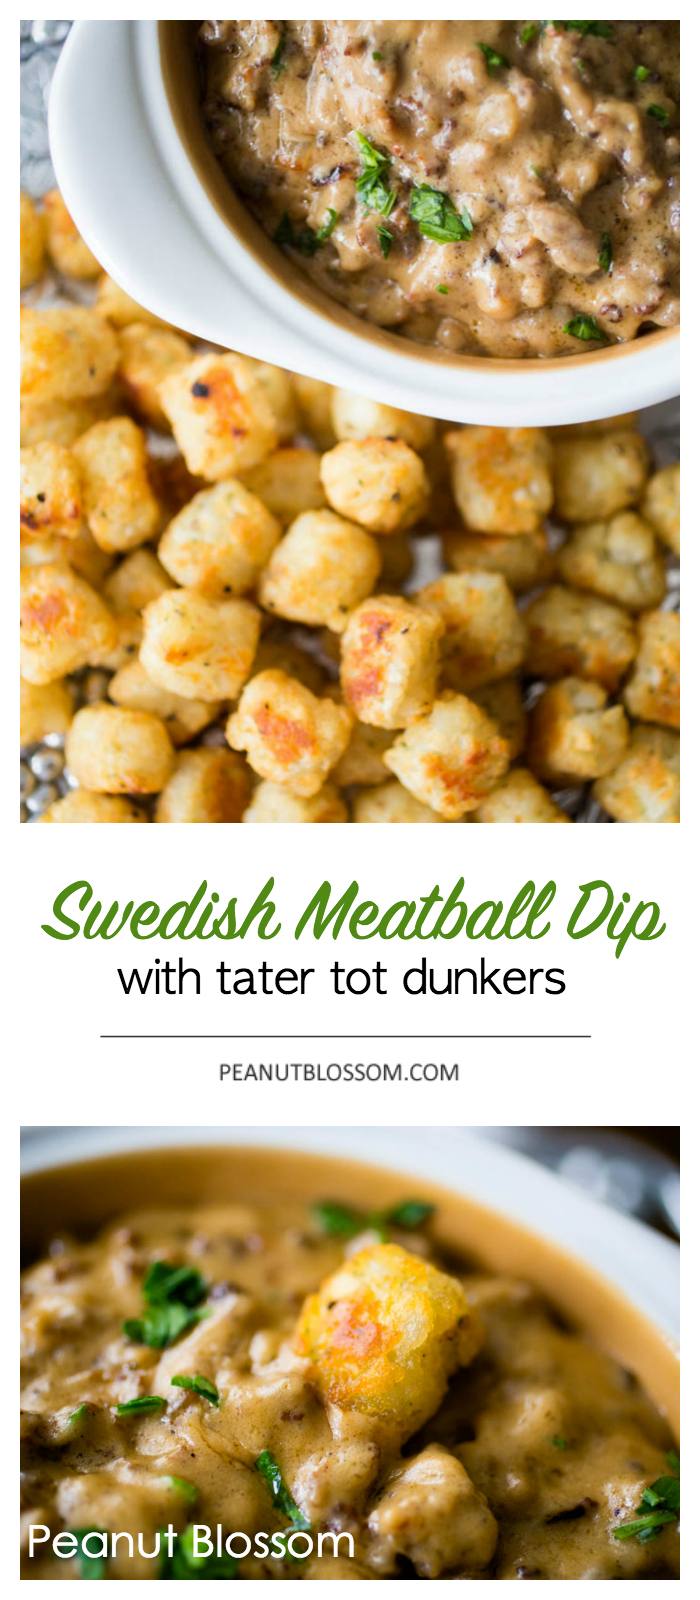 Swedish Meatball Sausage Dip with tater tot dunkers